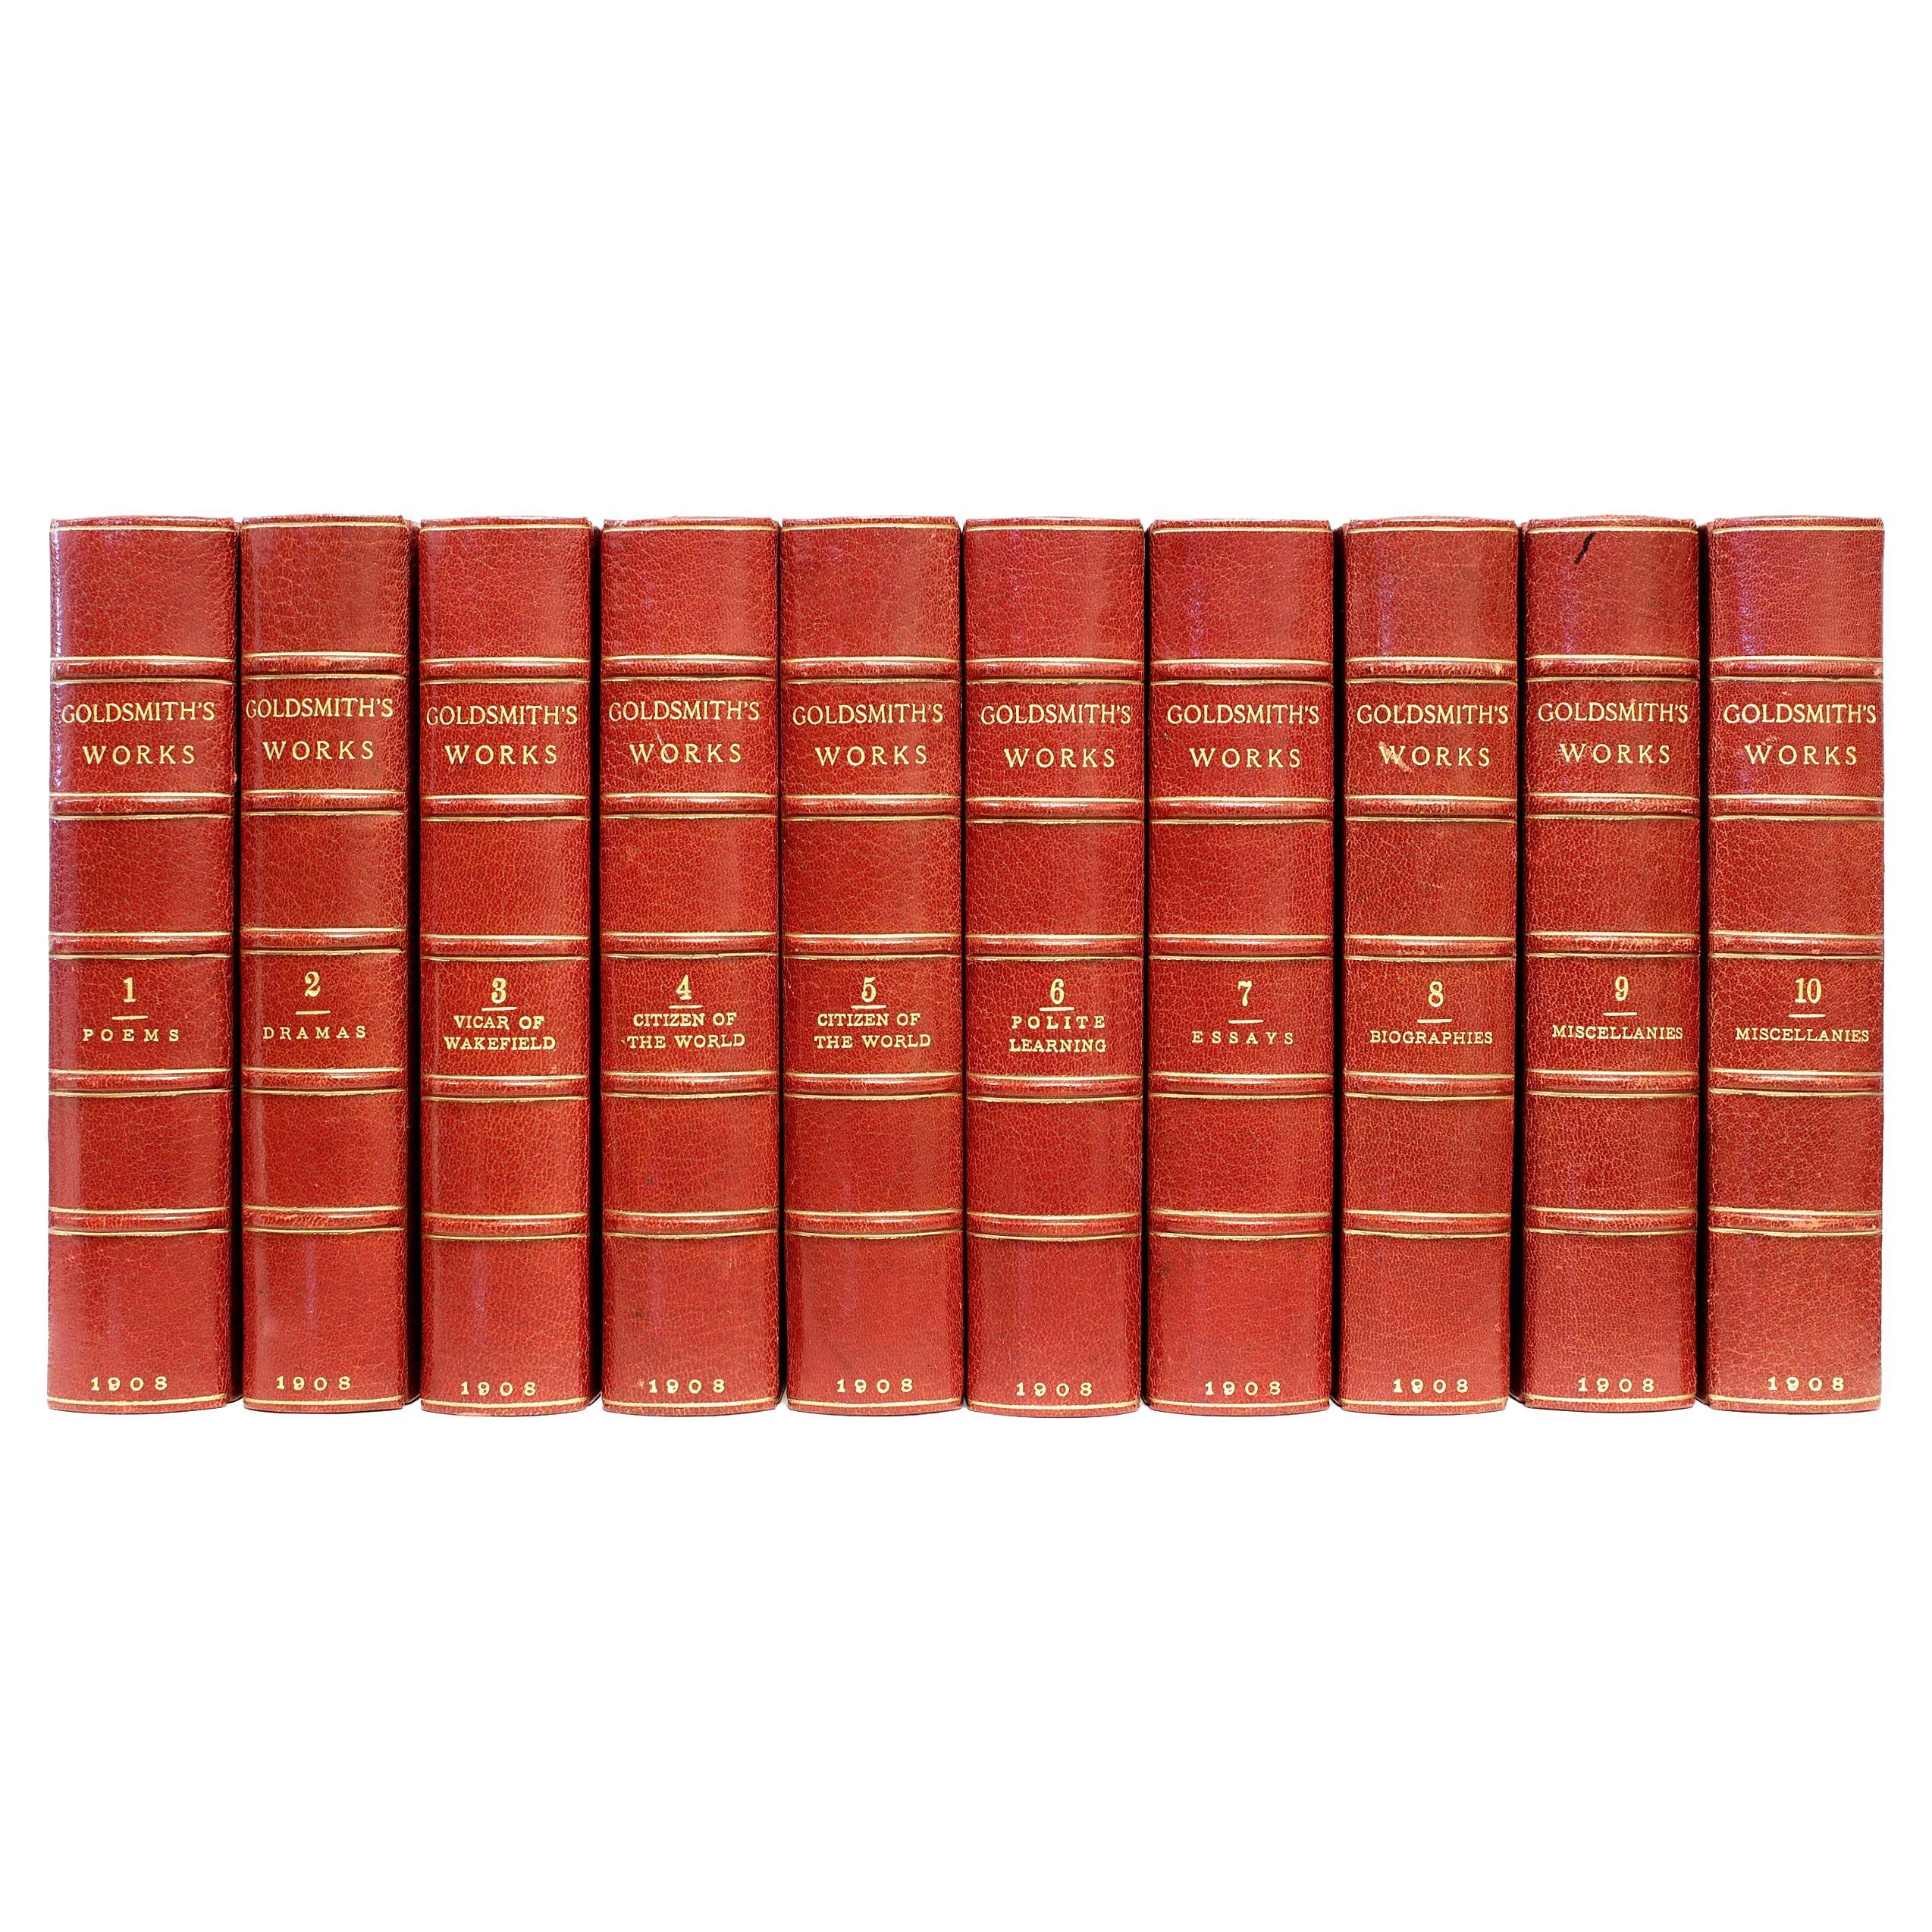 Works of Oliver Goldsmith-10 Vols.-Turk's Head Edition-in a Fine Binding